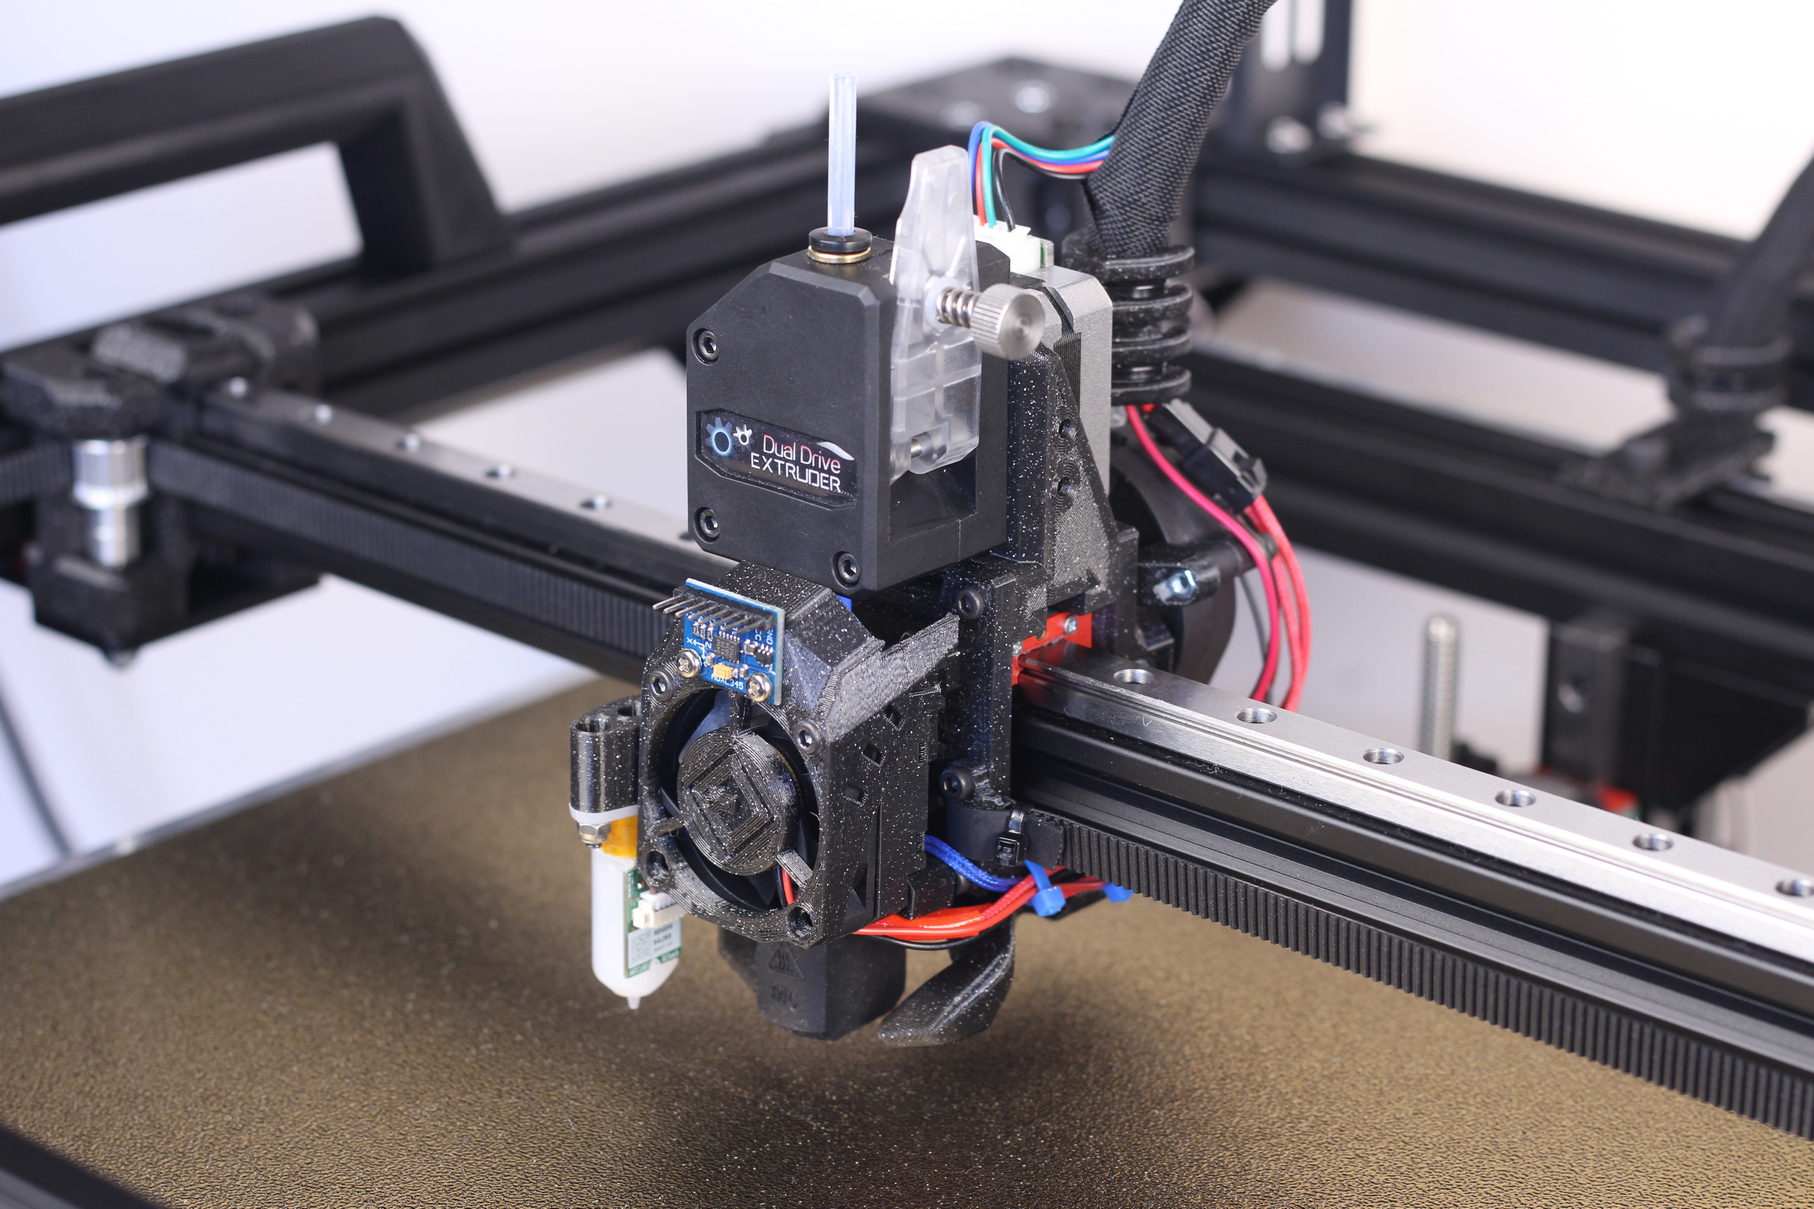 RatRig V Core 3 EVA mount with BMG and Dragonfly HIC 4 | RatRig V-Core 3 Review: Premium CoreXY 3D Printer Kit